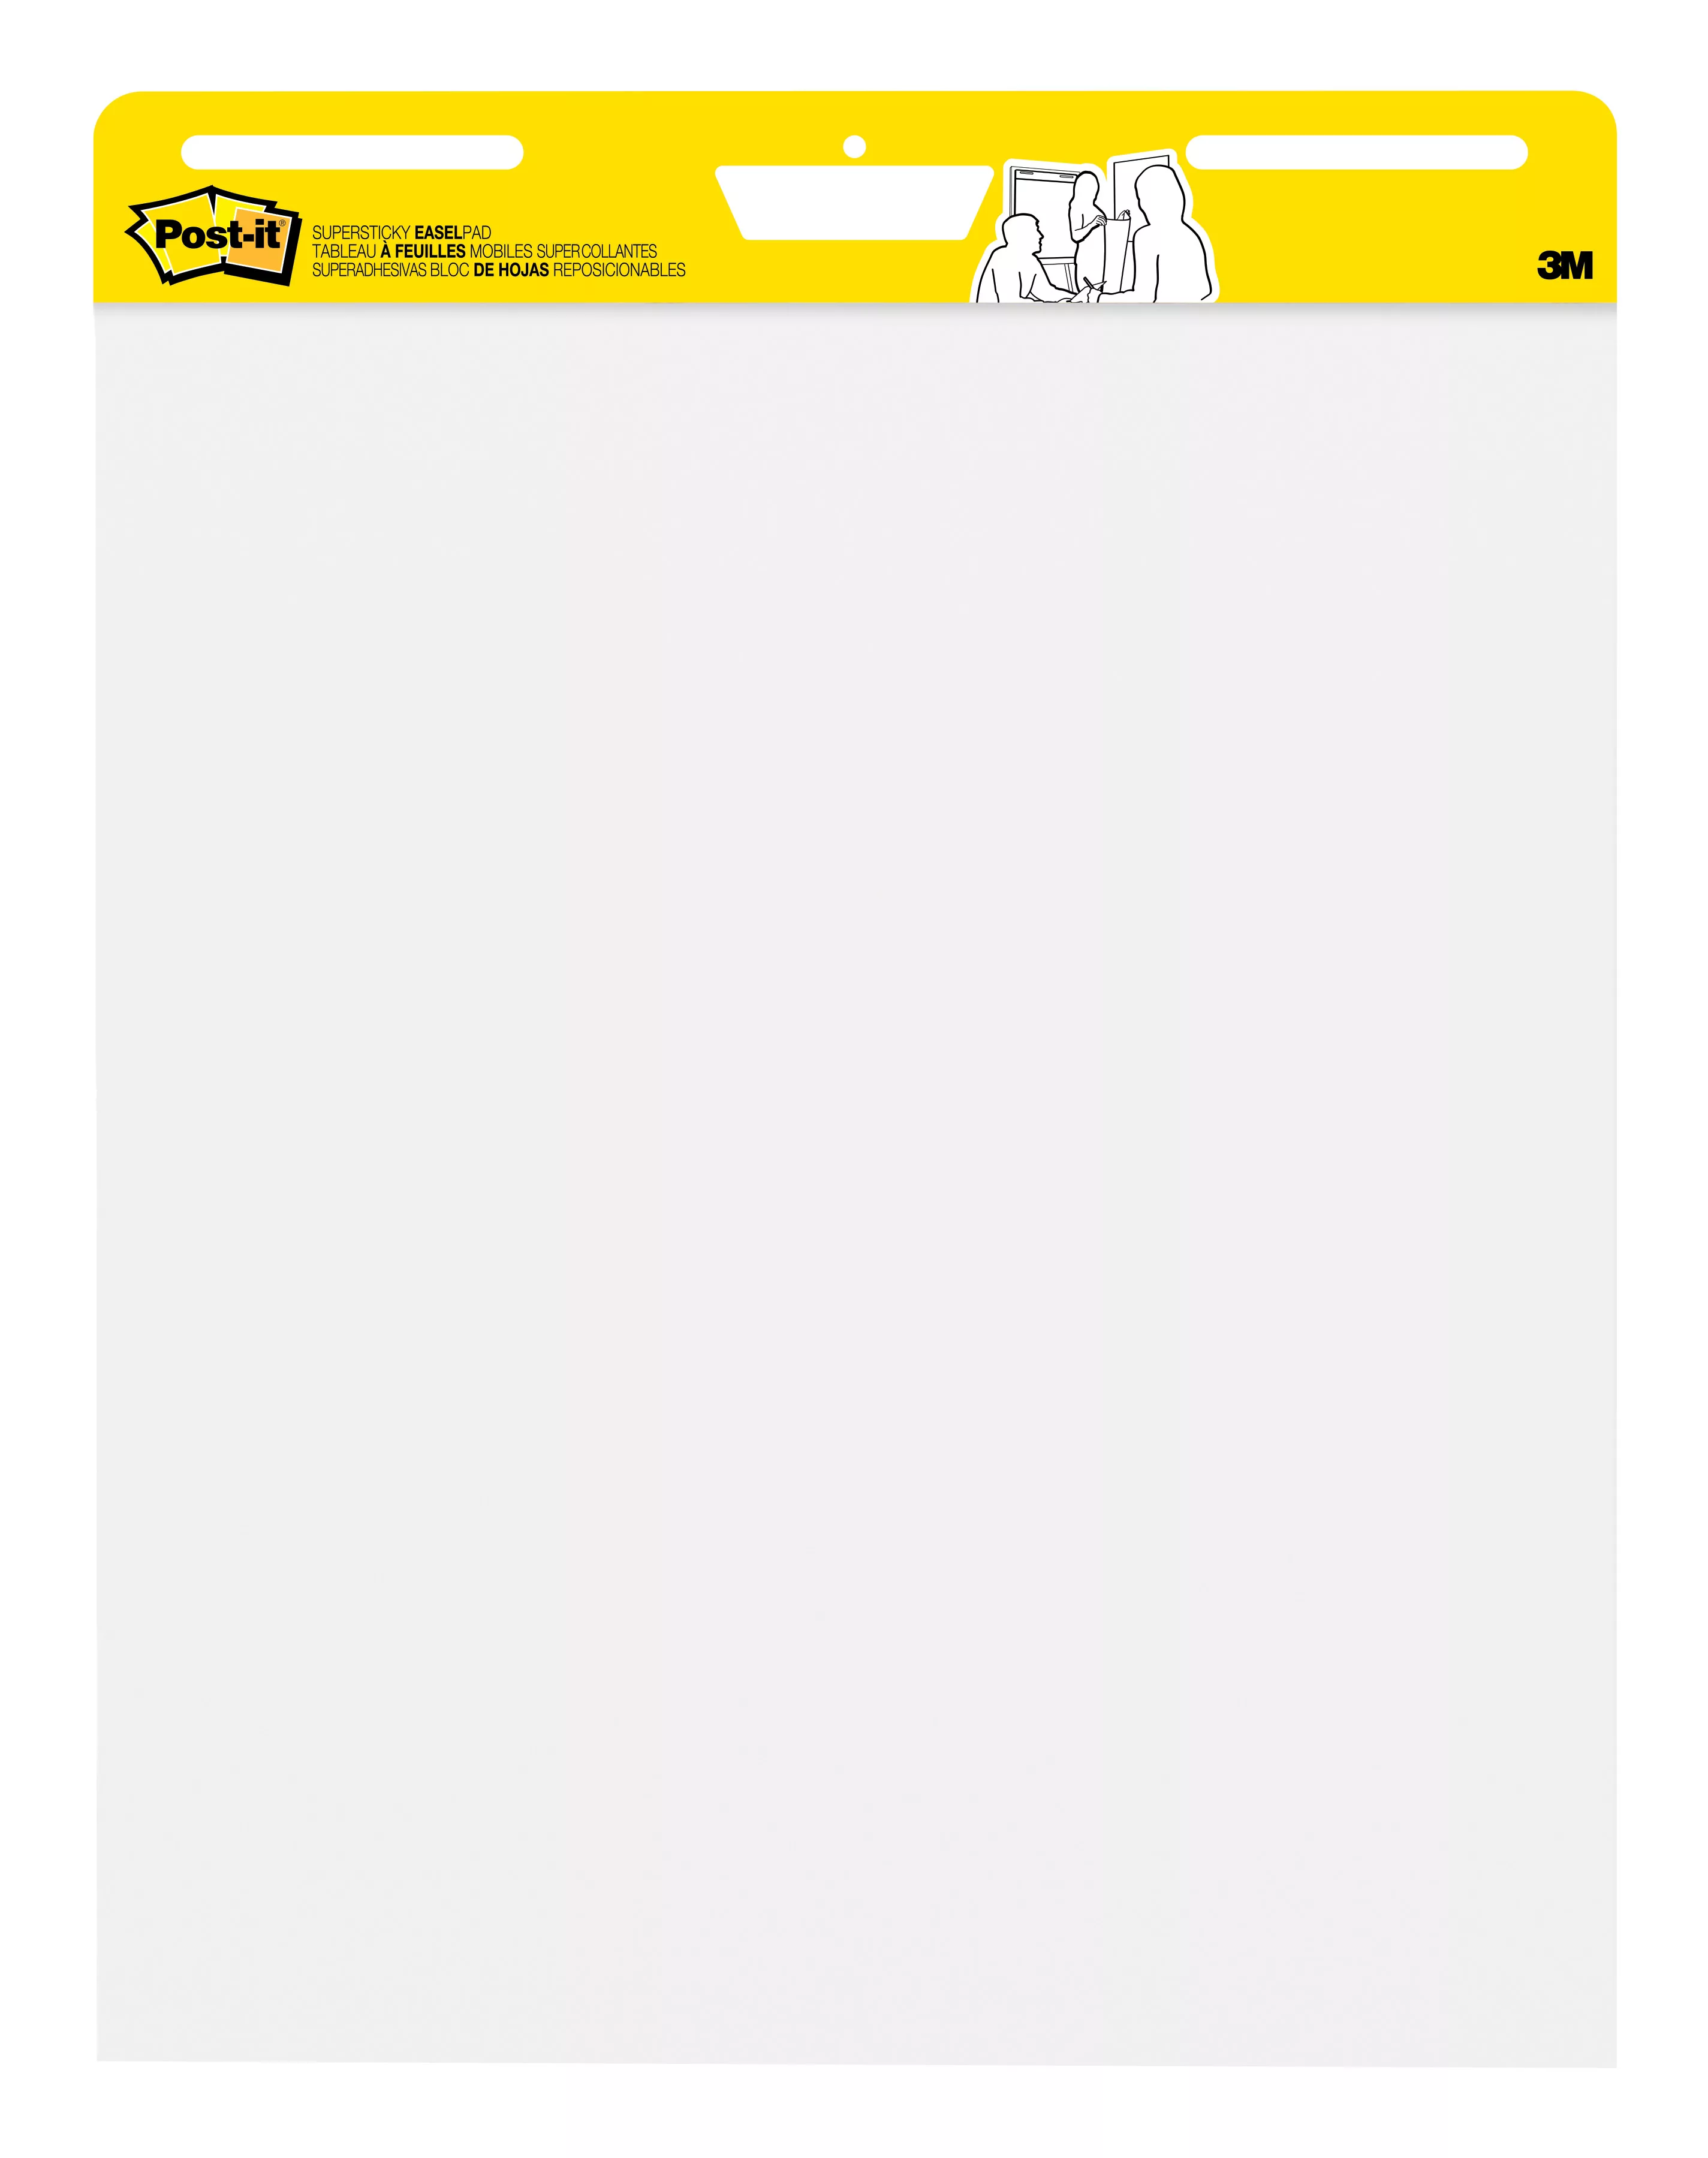 Post-it® Super Sticky Easel Pad 559SS, 25 in. x 30 in.